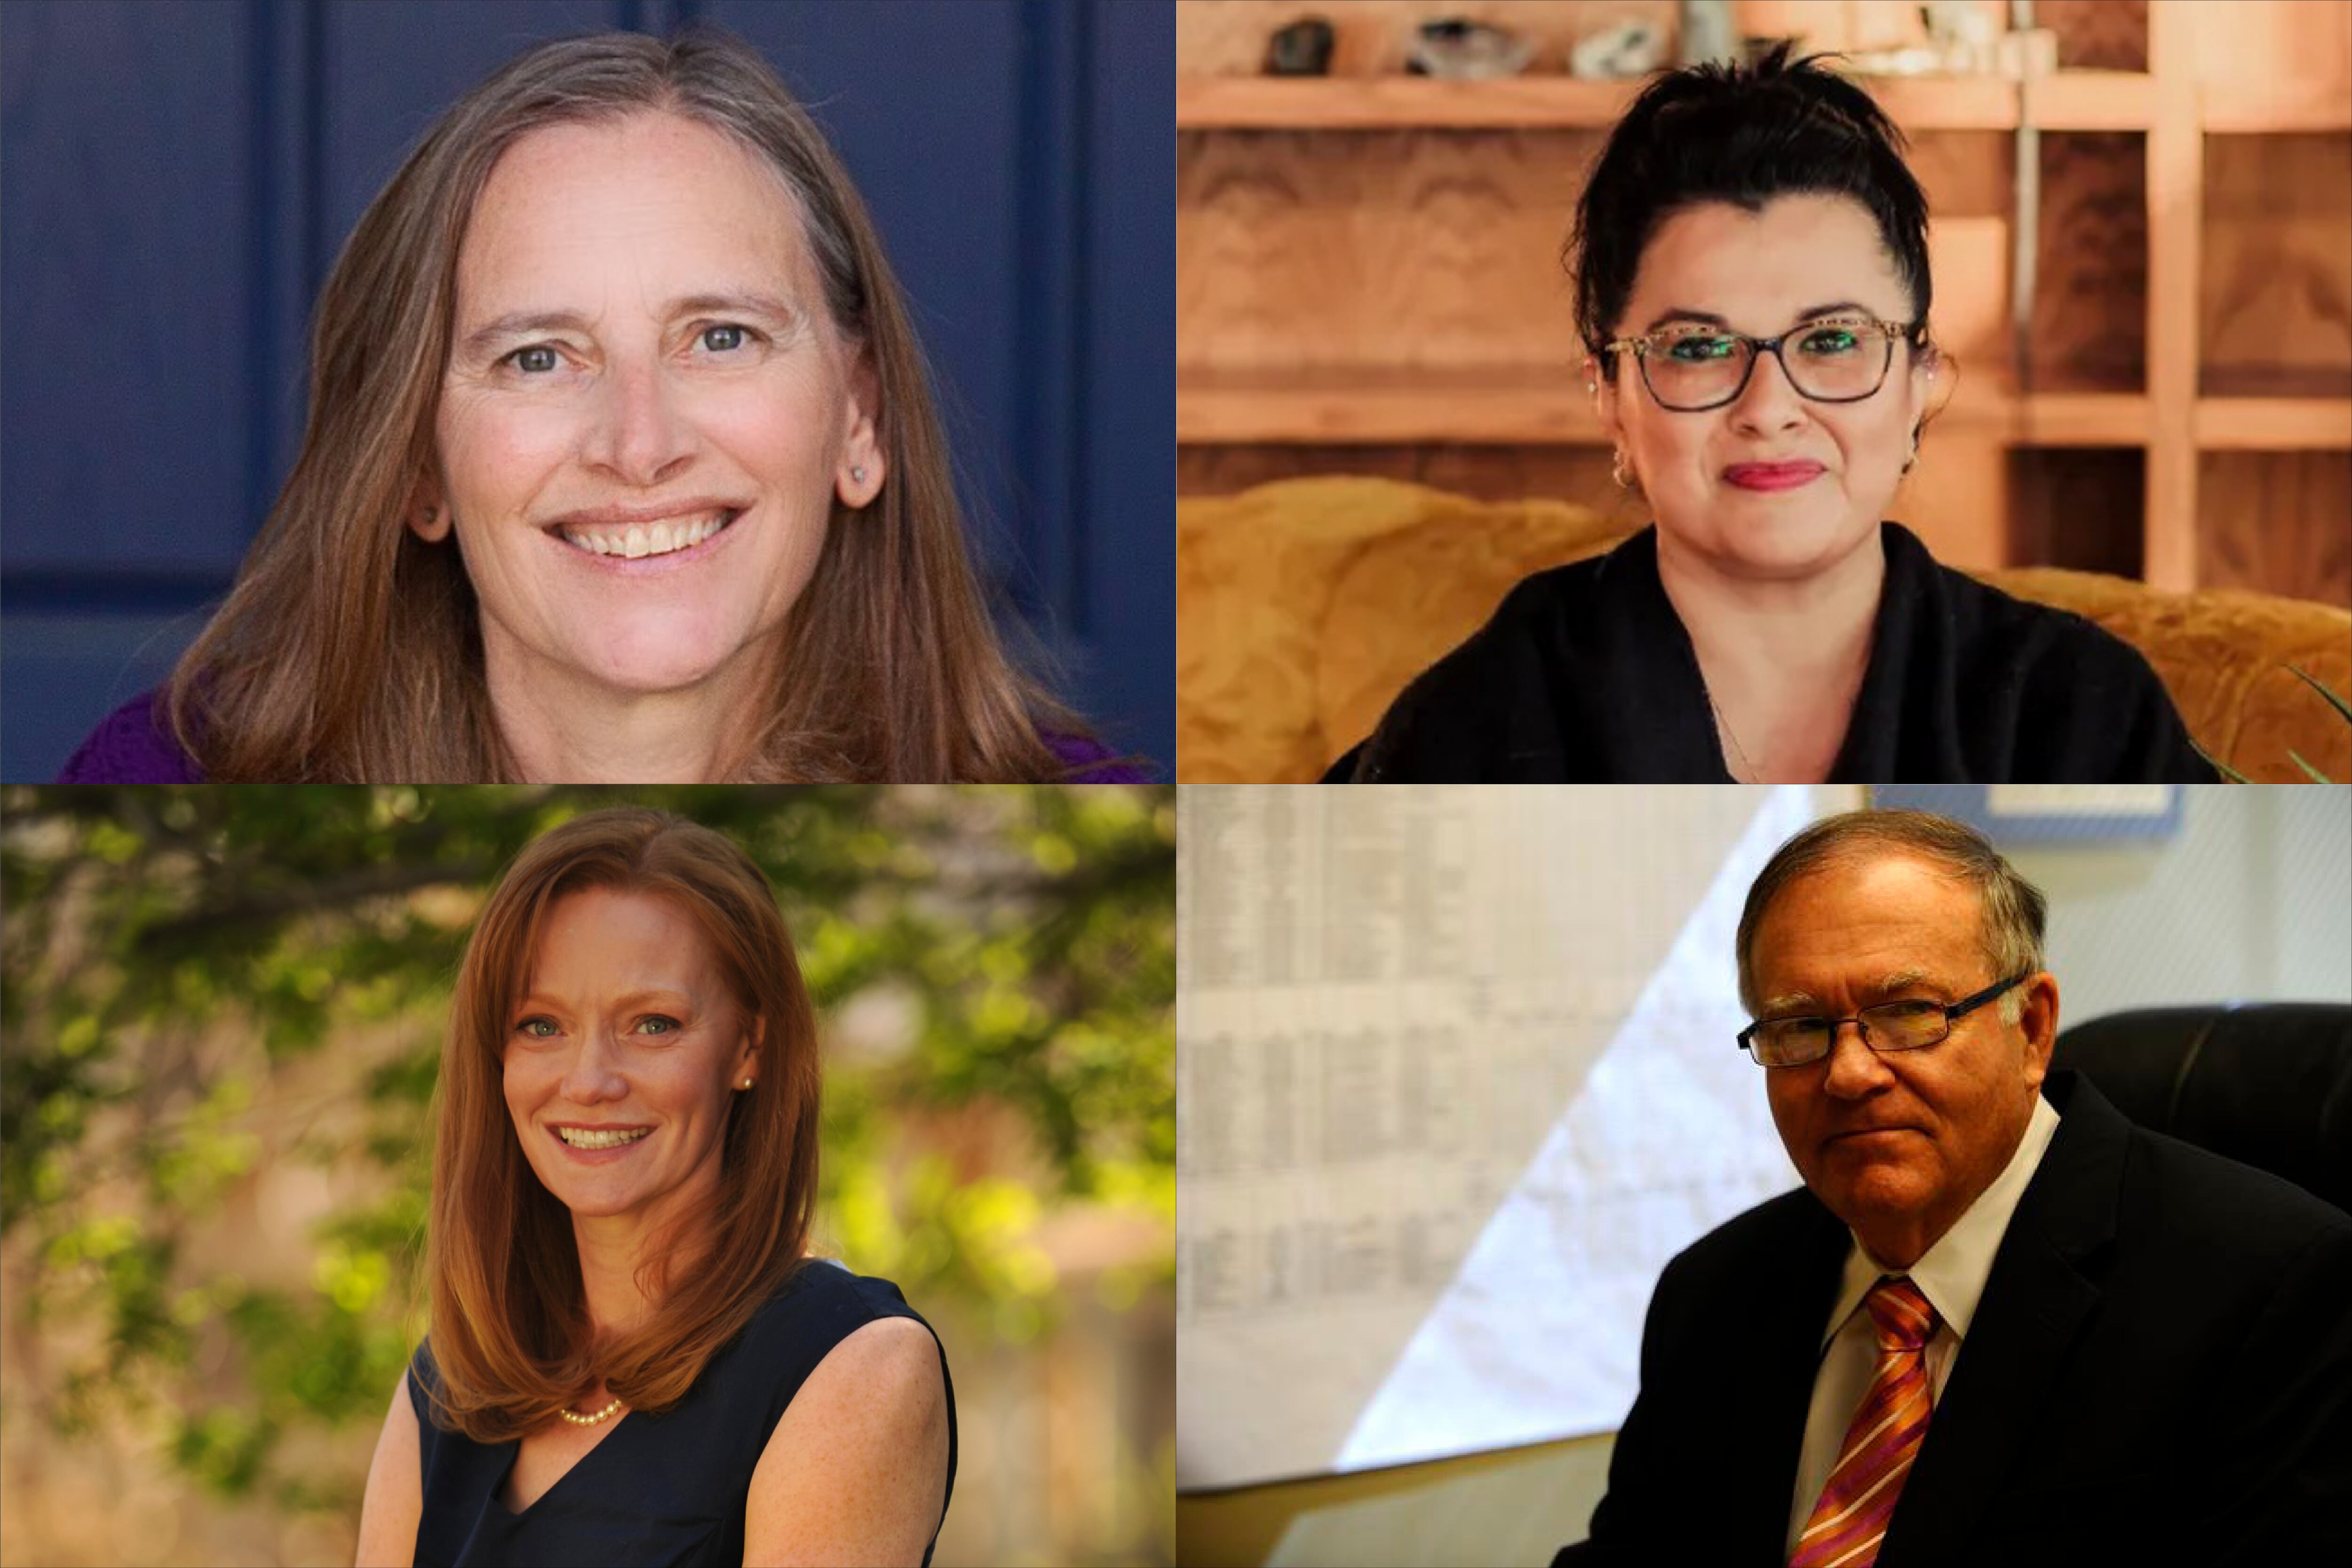 Image depicts four winning candidates for the Colorado State Board of Education. Clockwise from upper left, they are: Kathy Plomer, Rhonda Solis, Steve Durham, and Rebecca McClellan.